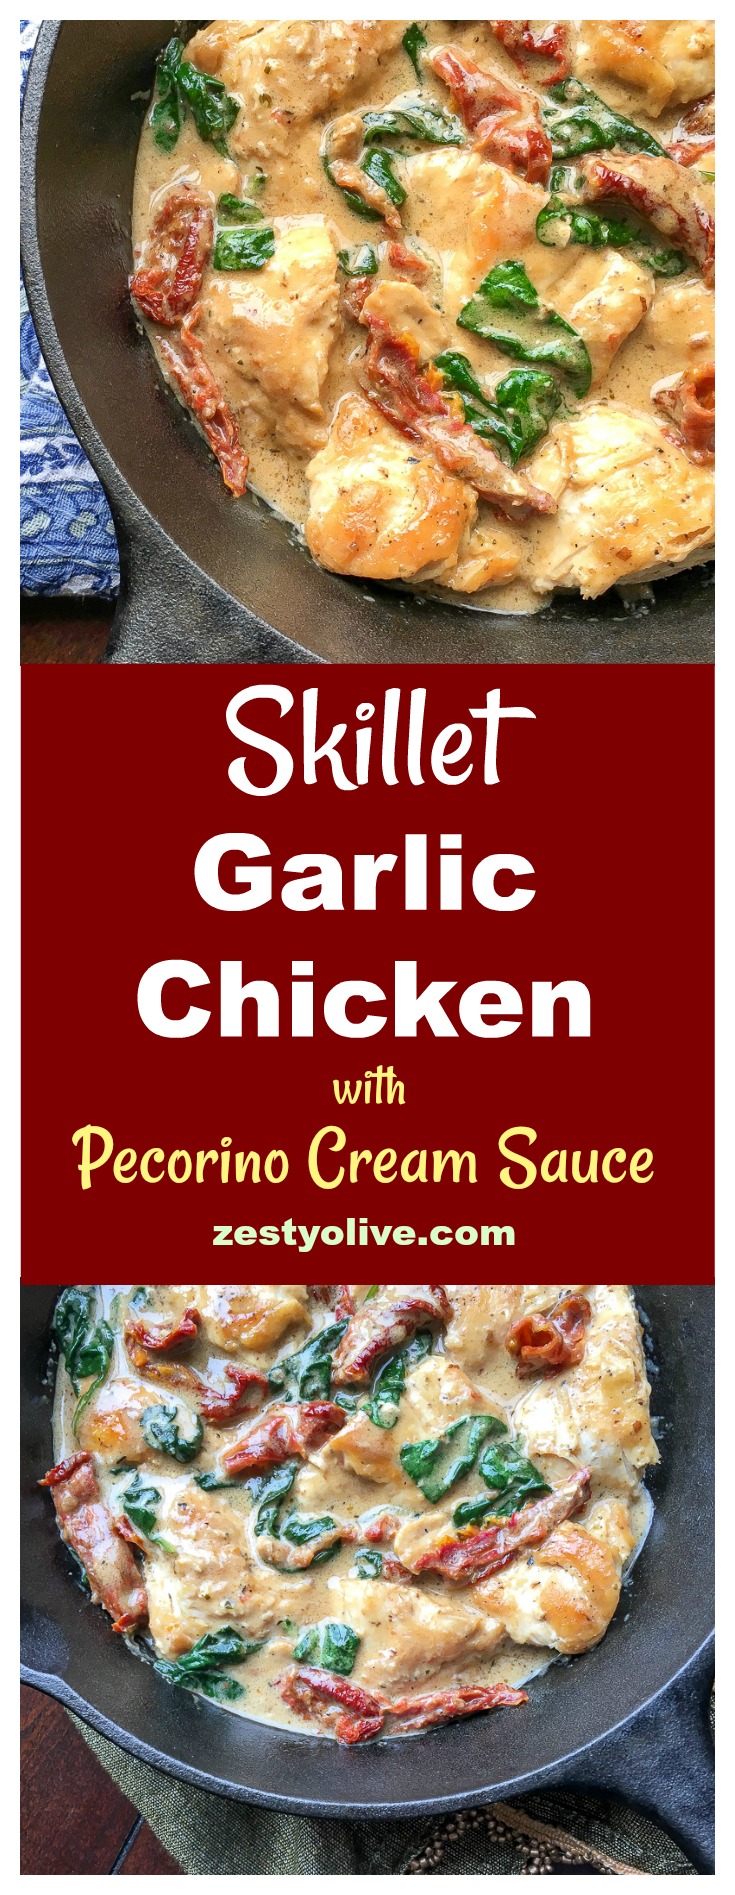 Bring a taste of Tuscany home with this simple, quick and delicious recipe for Skillet Garlic Chicken with Sun-dried Tomatoes and Pecorino Cream Sauce.